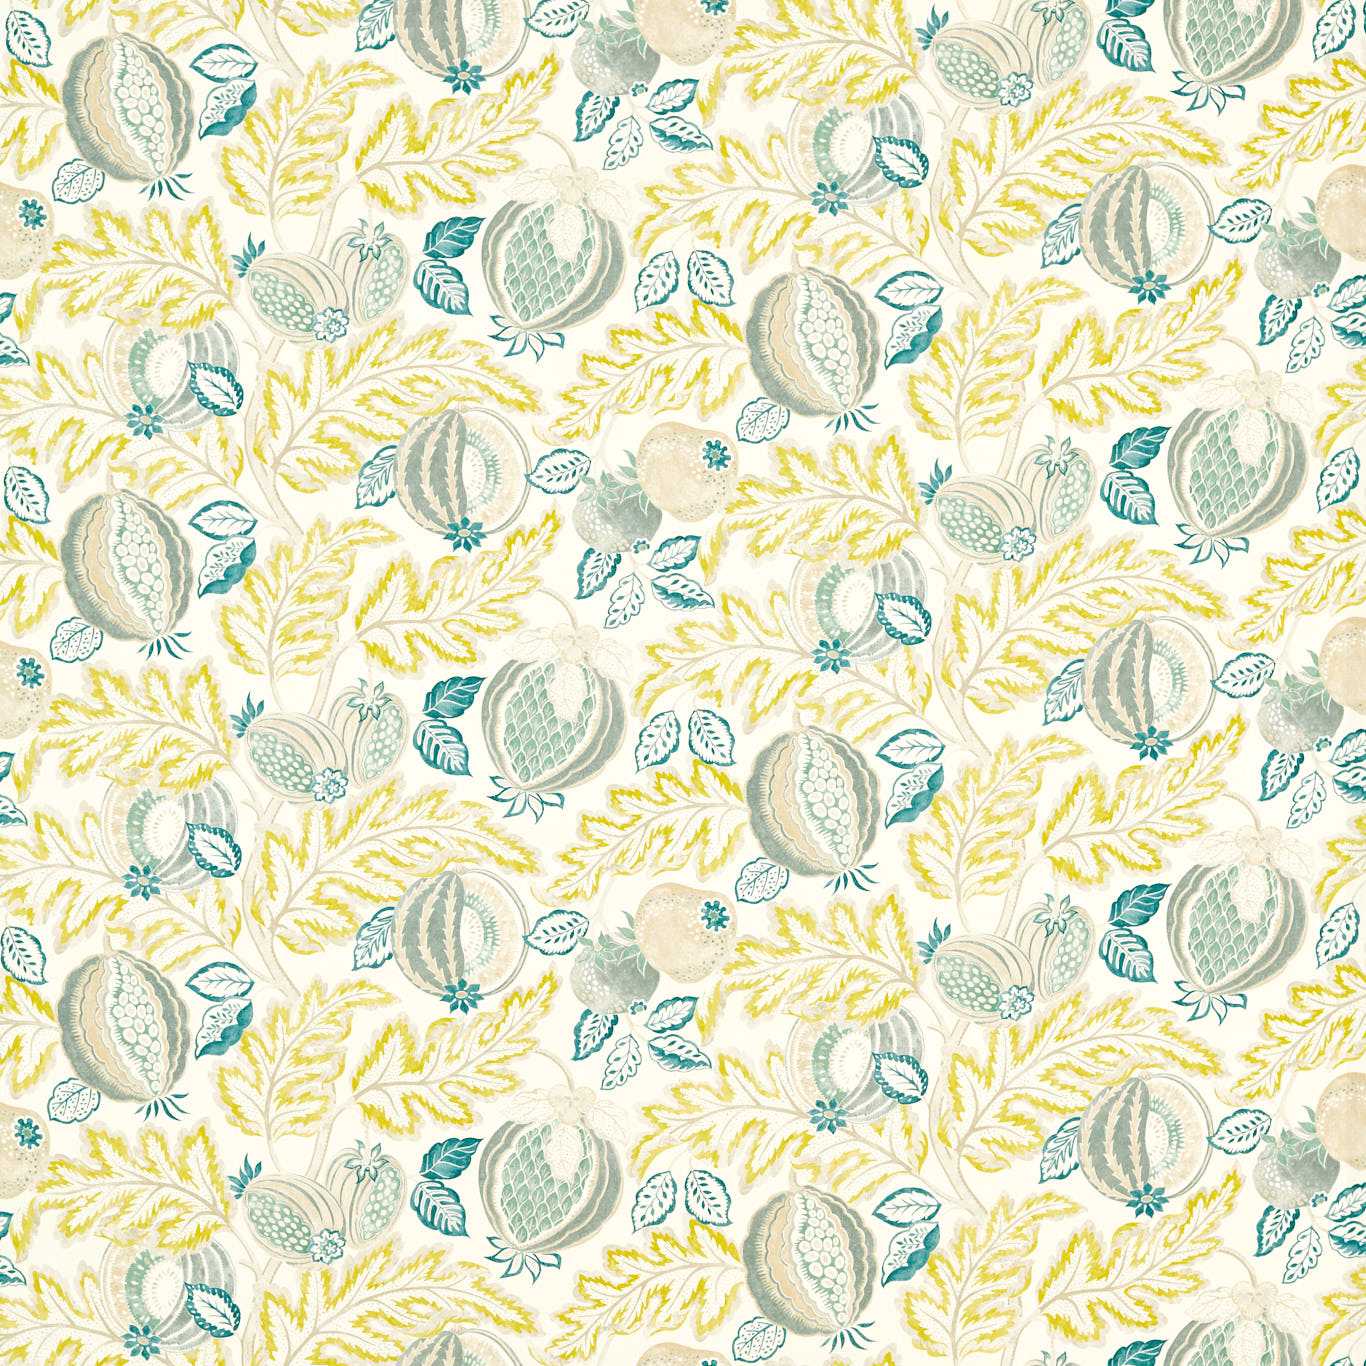 Cantaloupe Seasalt/Quince Fabric by SAN